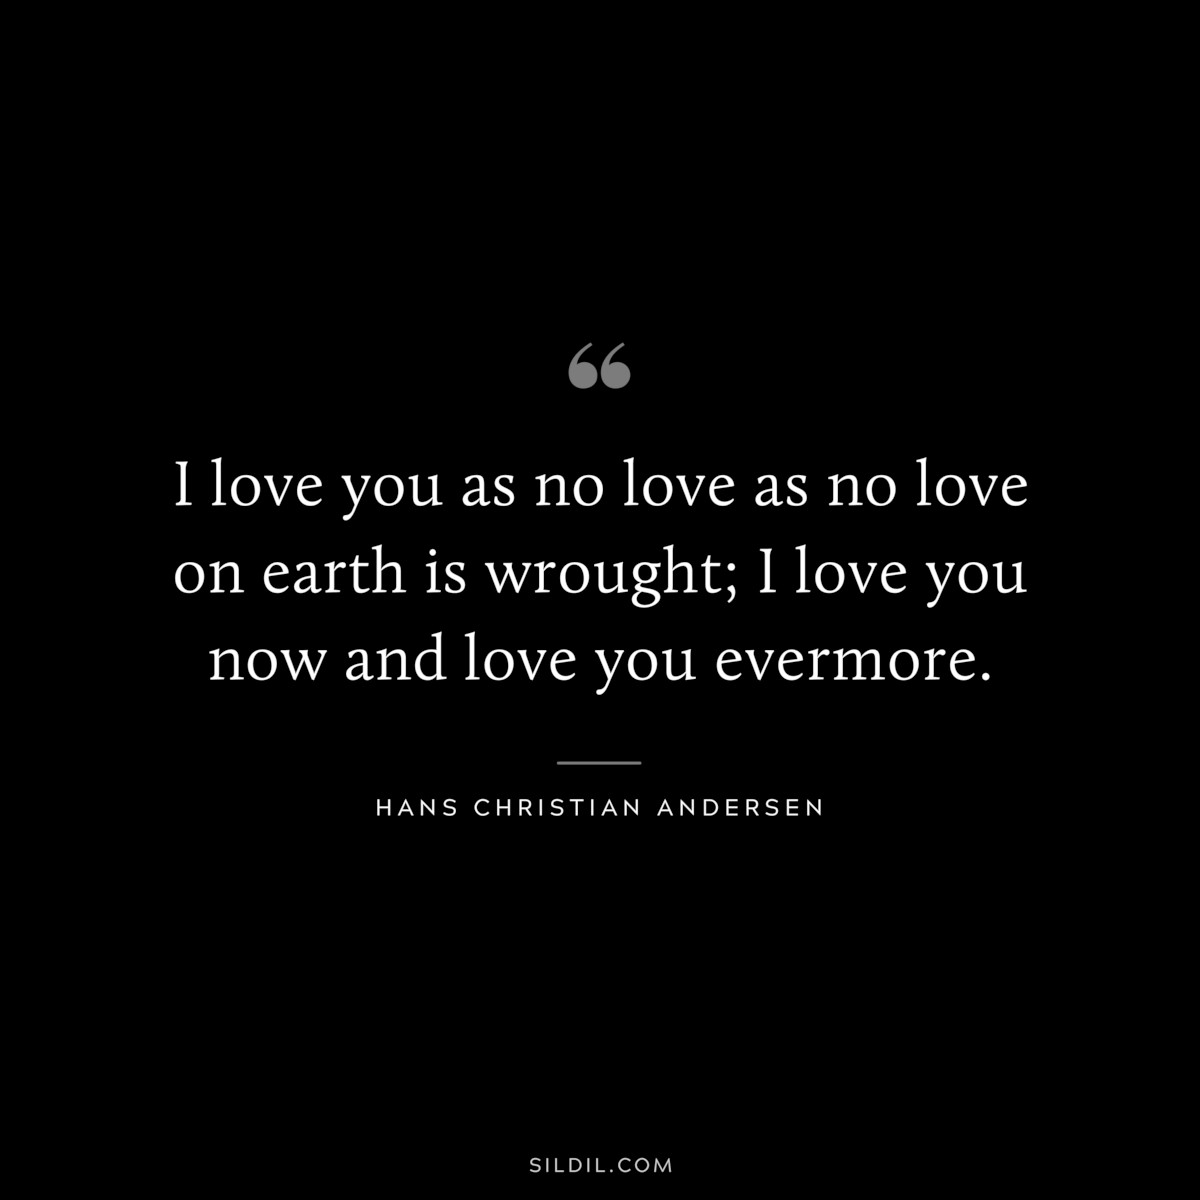 I love you as no love as no love on earth is wrought; I love you now and love you evermore. ― Hans Christian Andersen